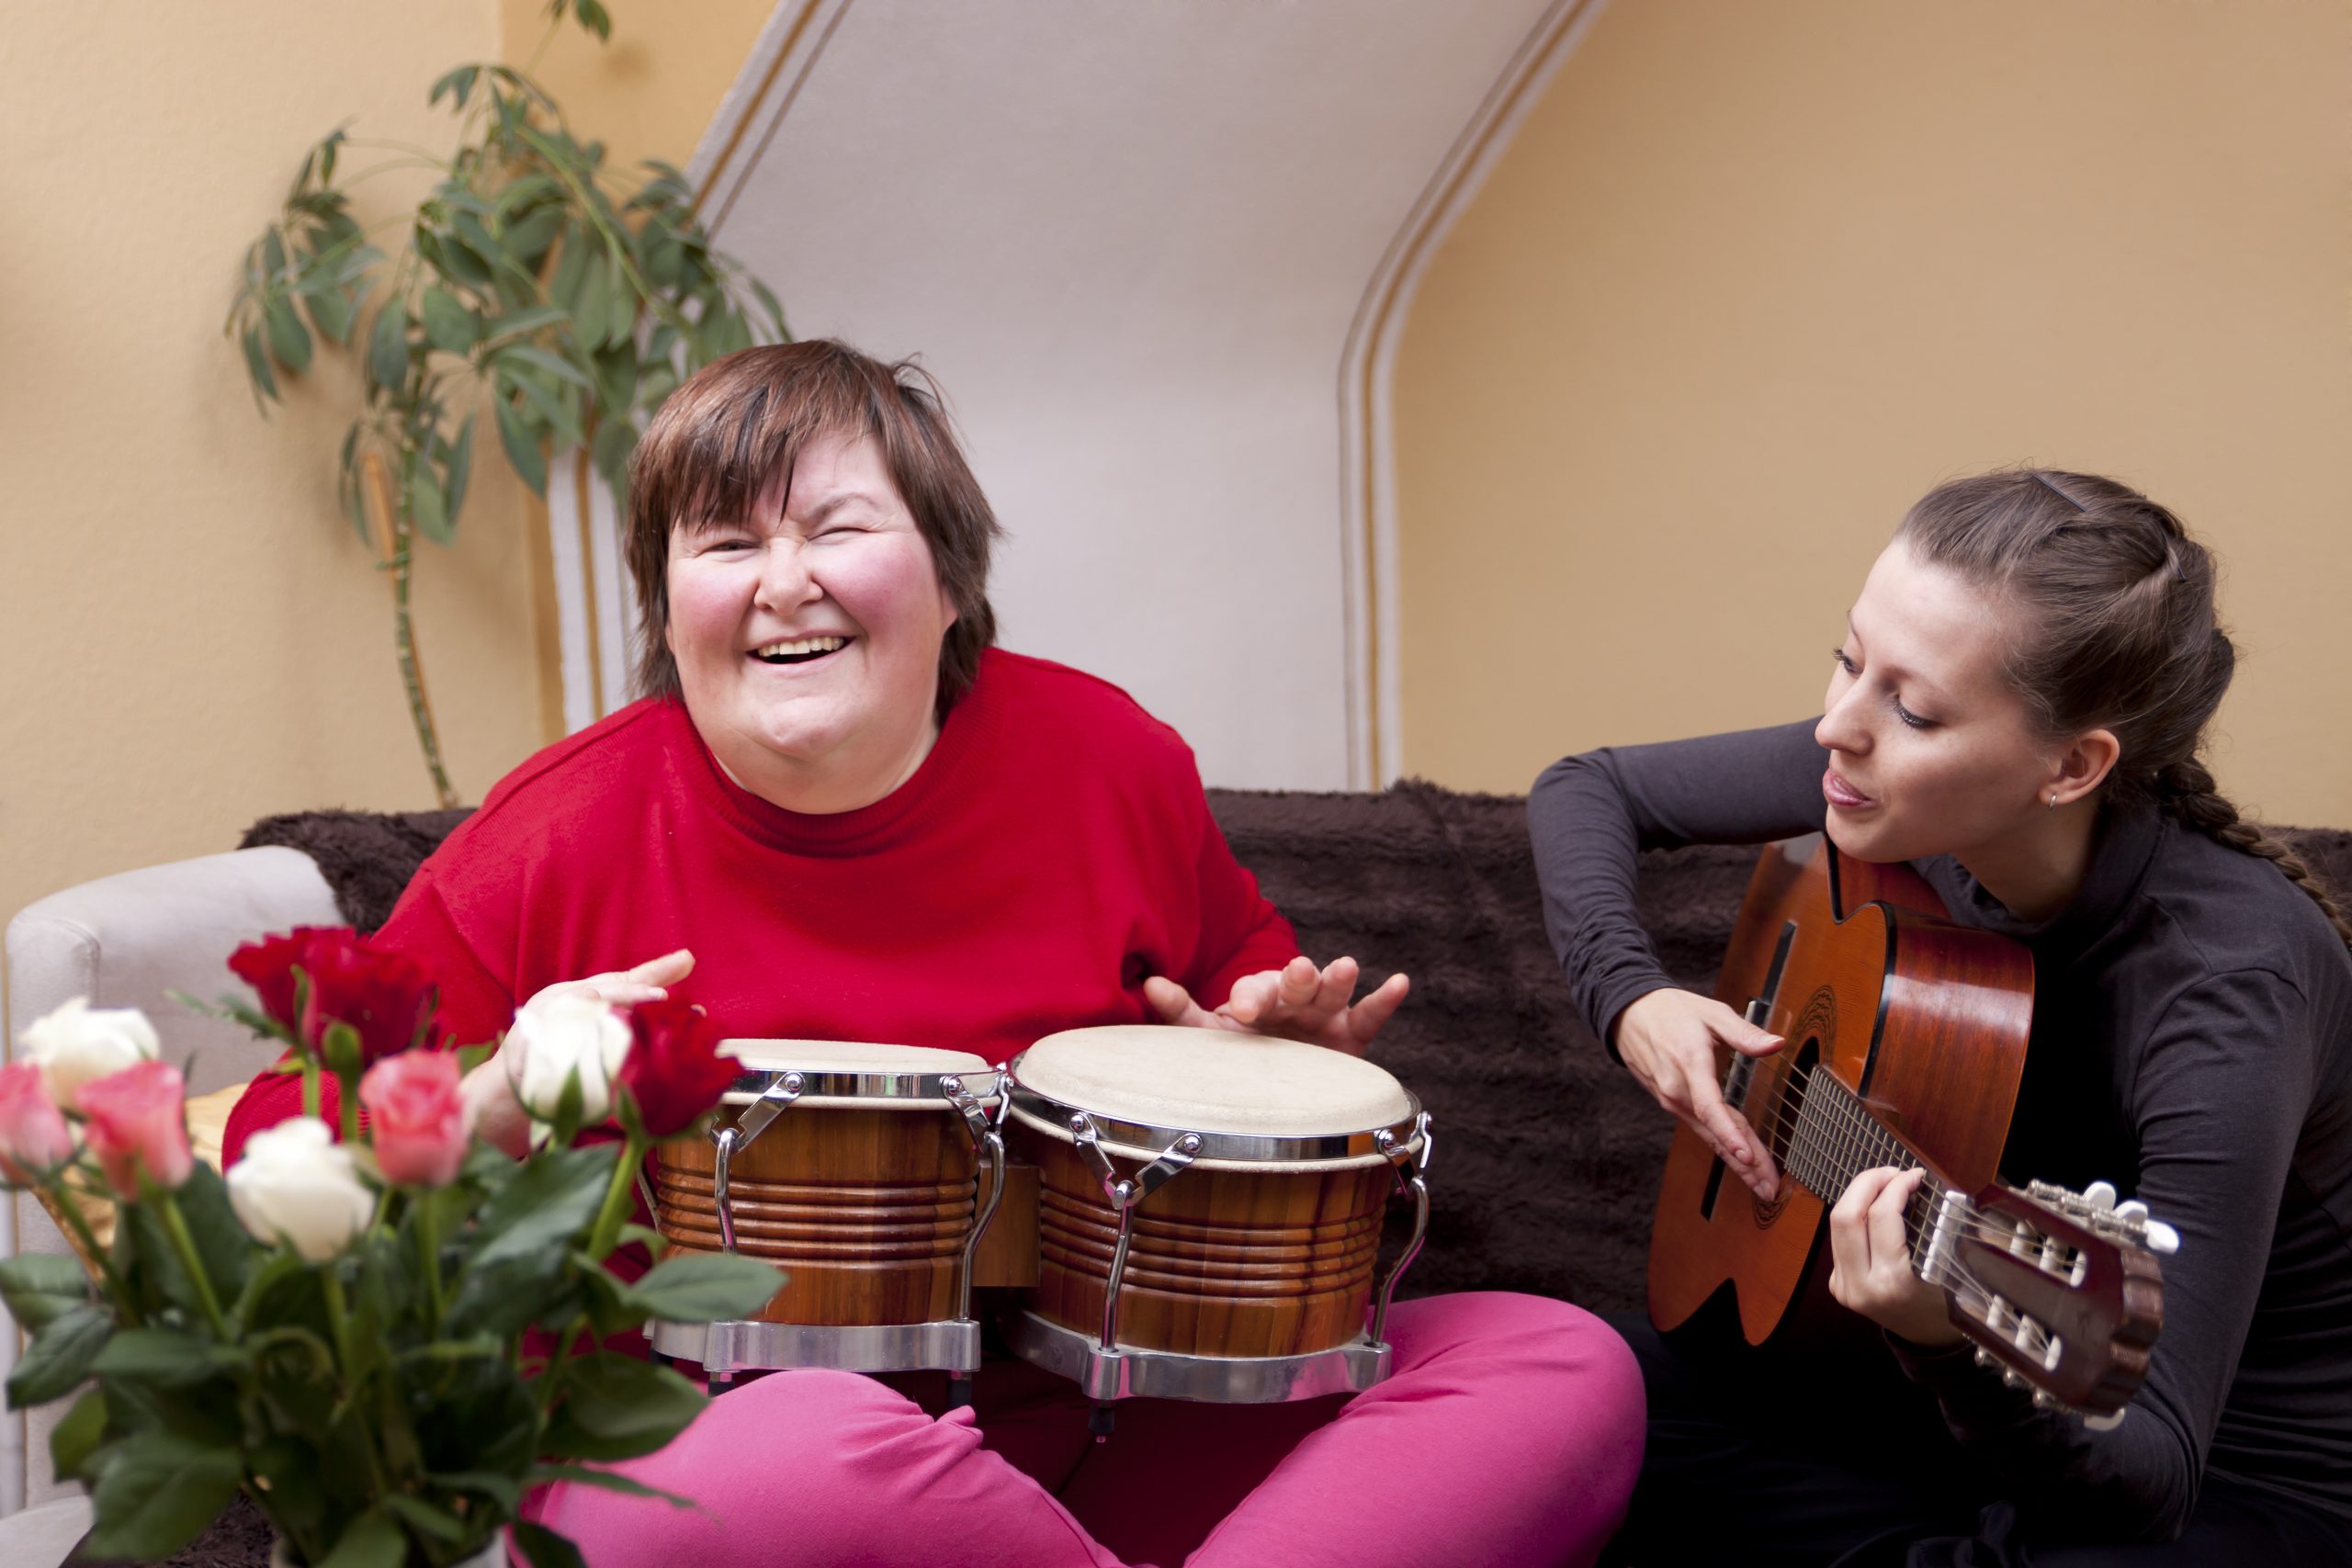 Person with disability playing music and smiling